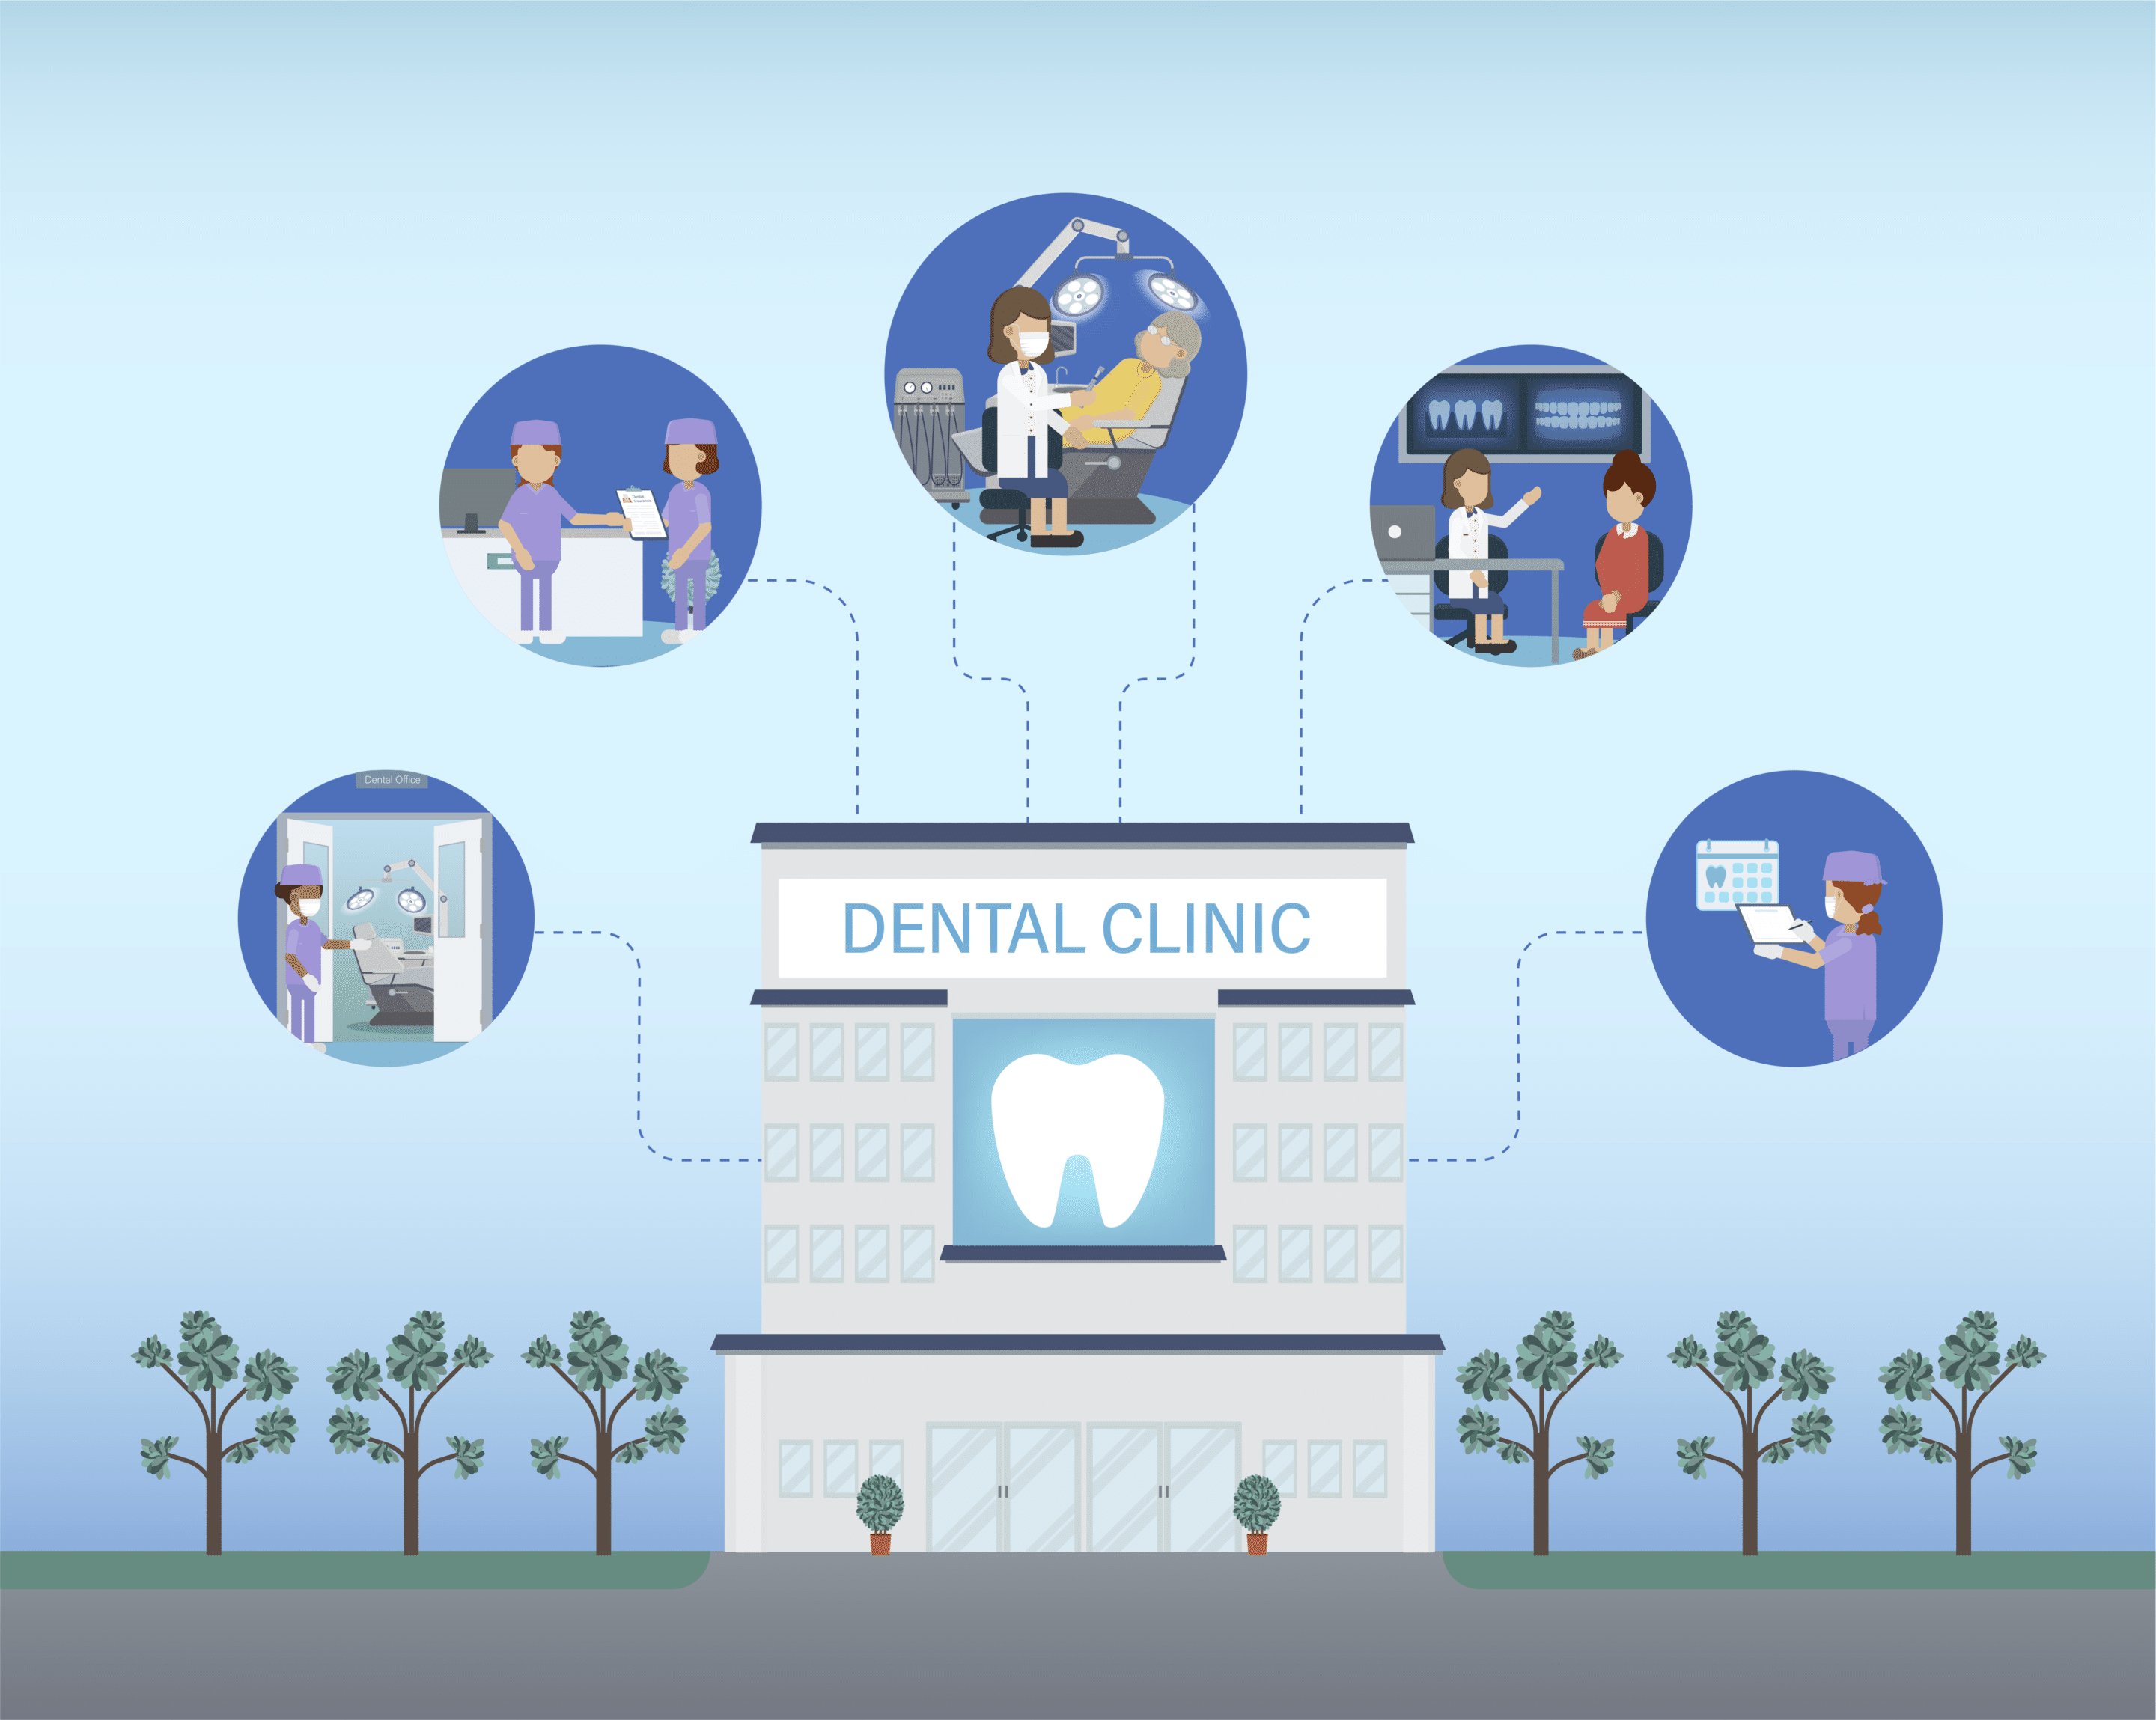 Finding the Right Place For Your Dental Practice